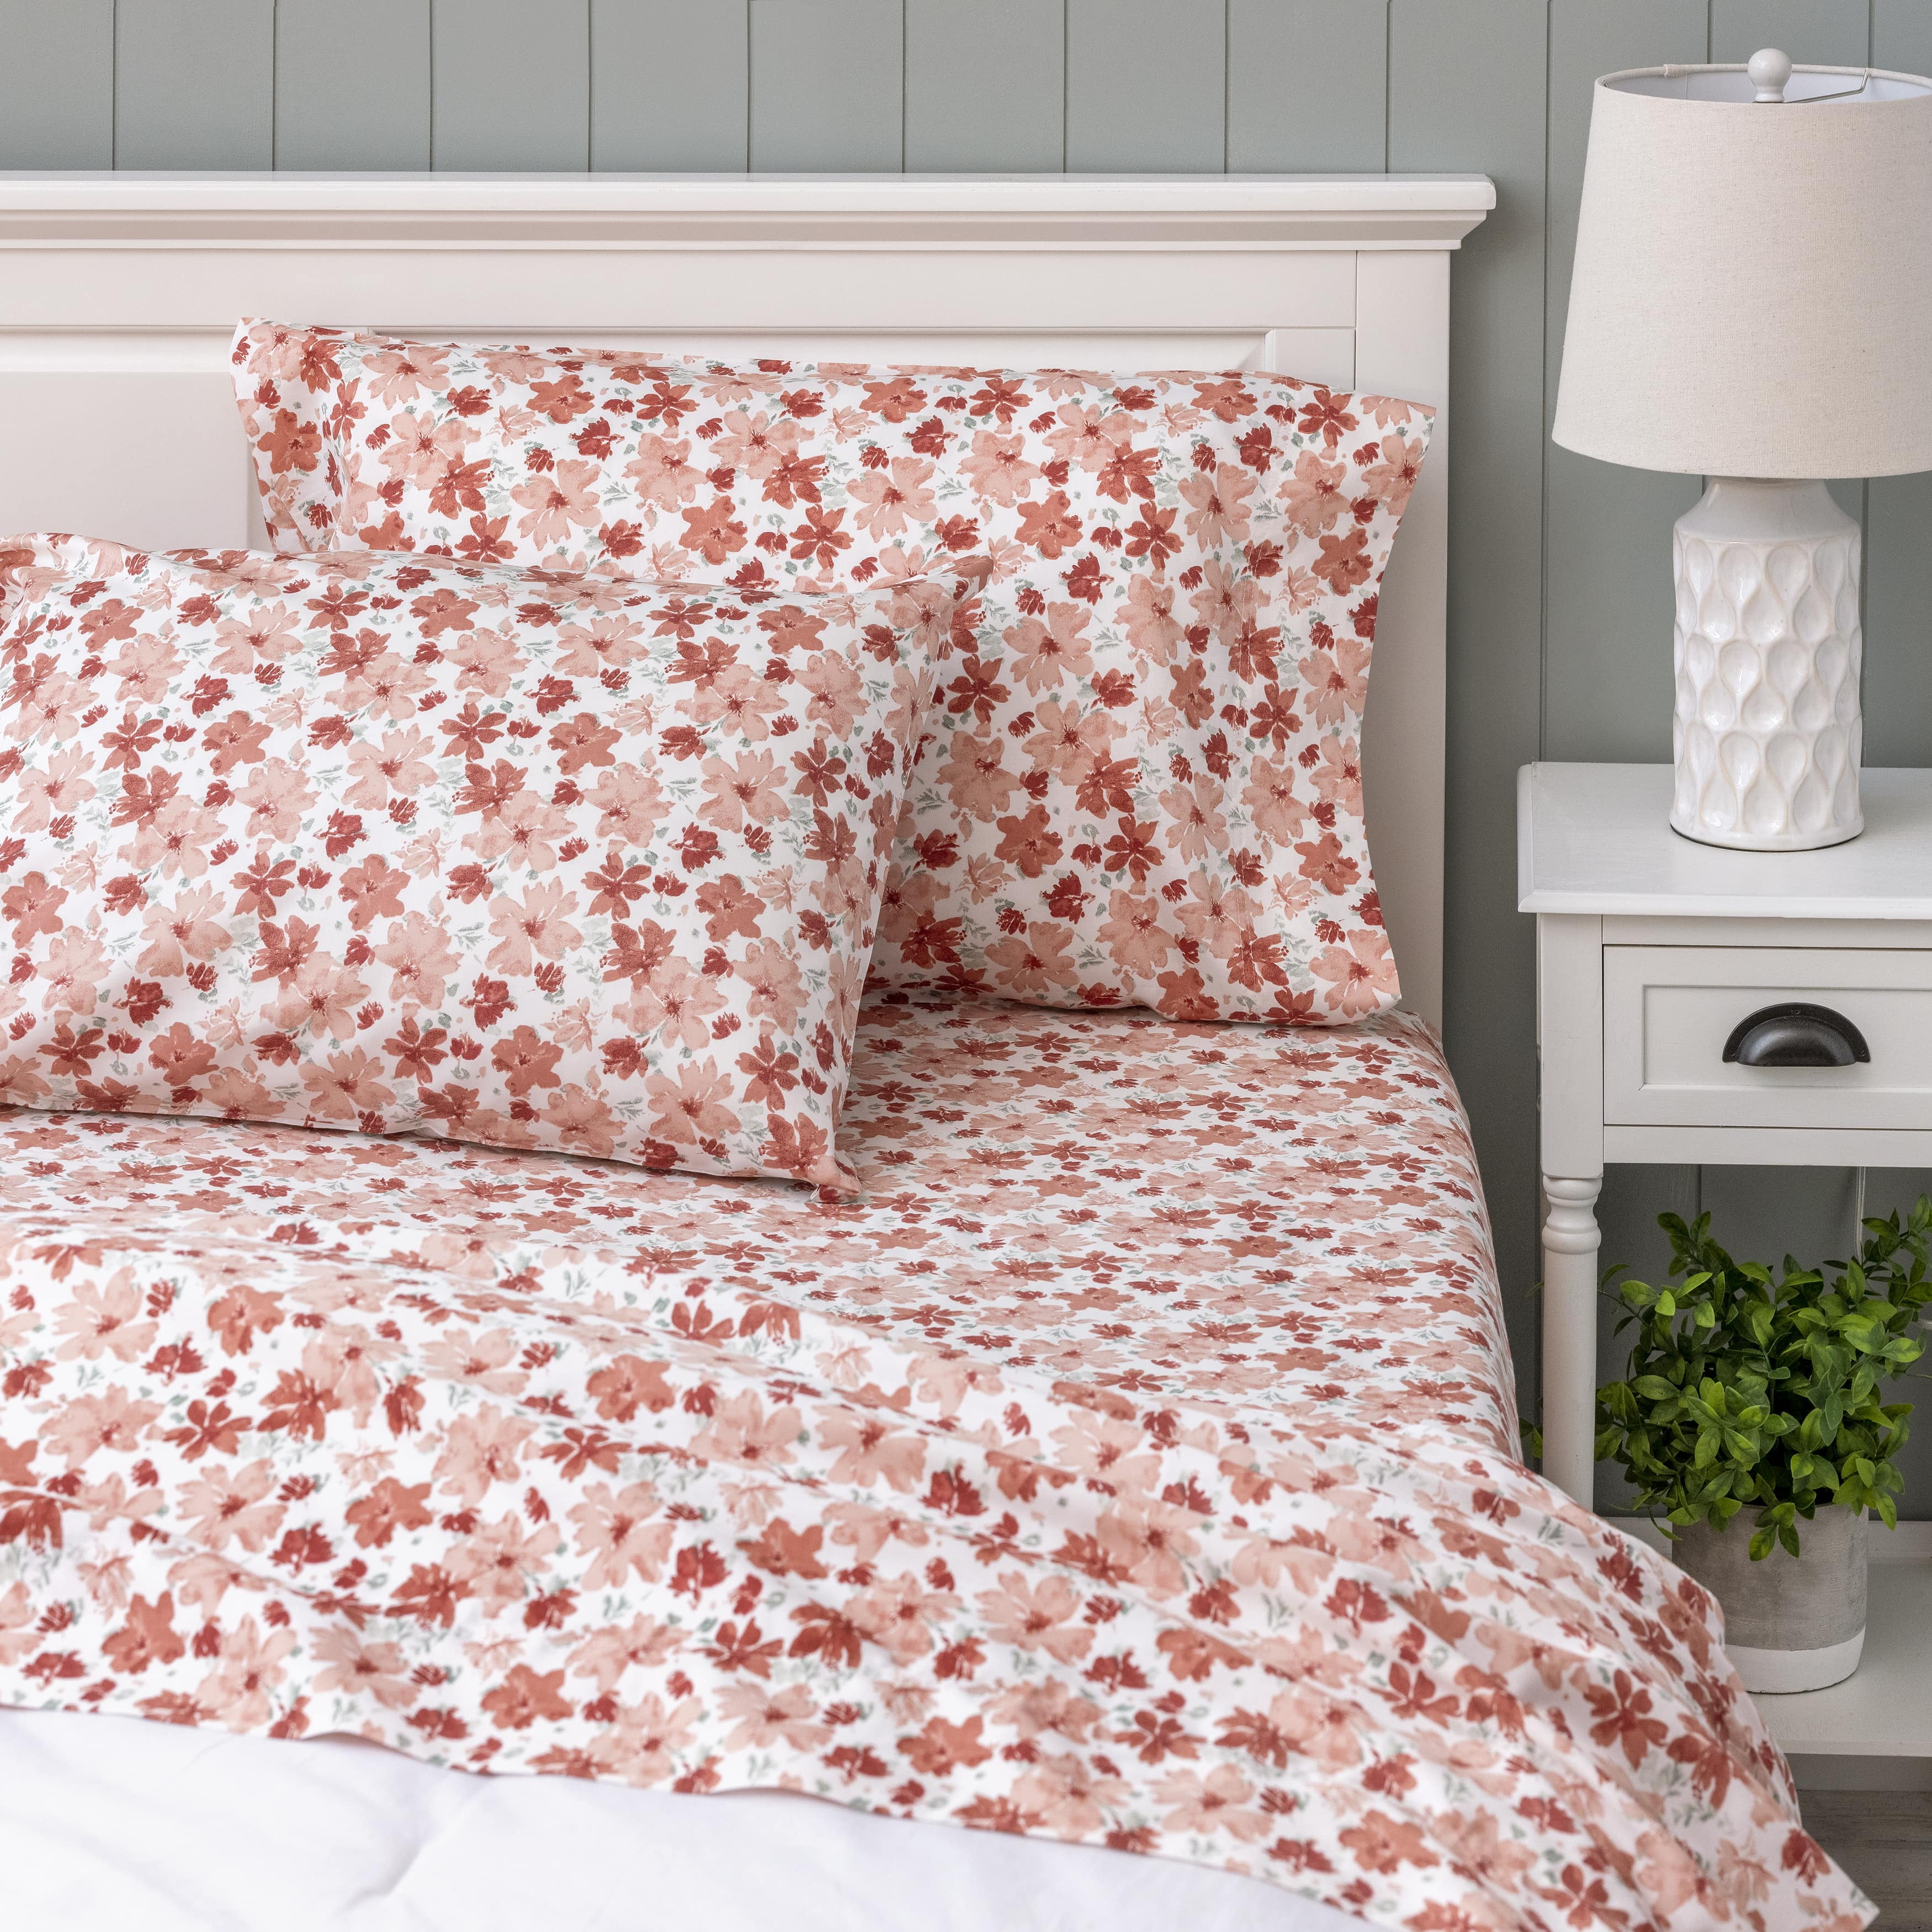 Better Homes & Gardens Signature Soft Cotton & Rayon Made from Bamboo Bed Sheet Set, Queen, Coral Floral